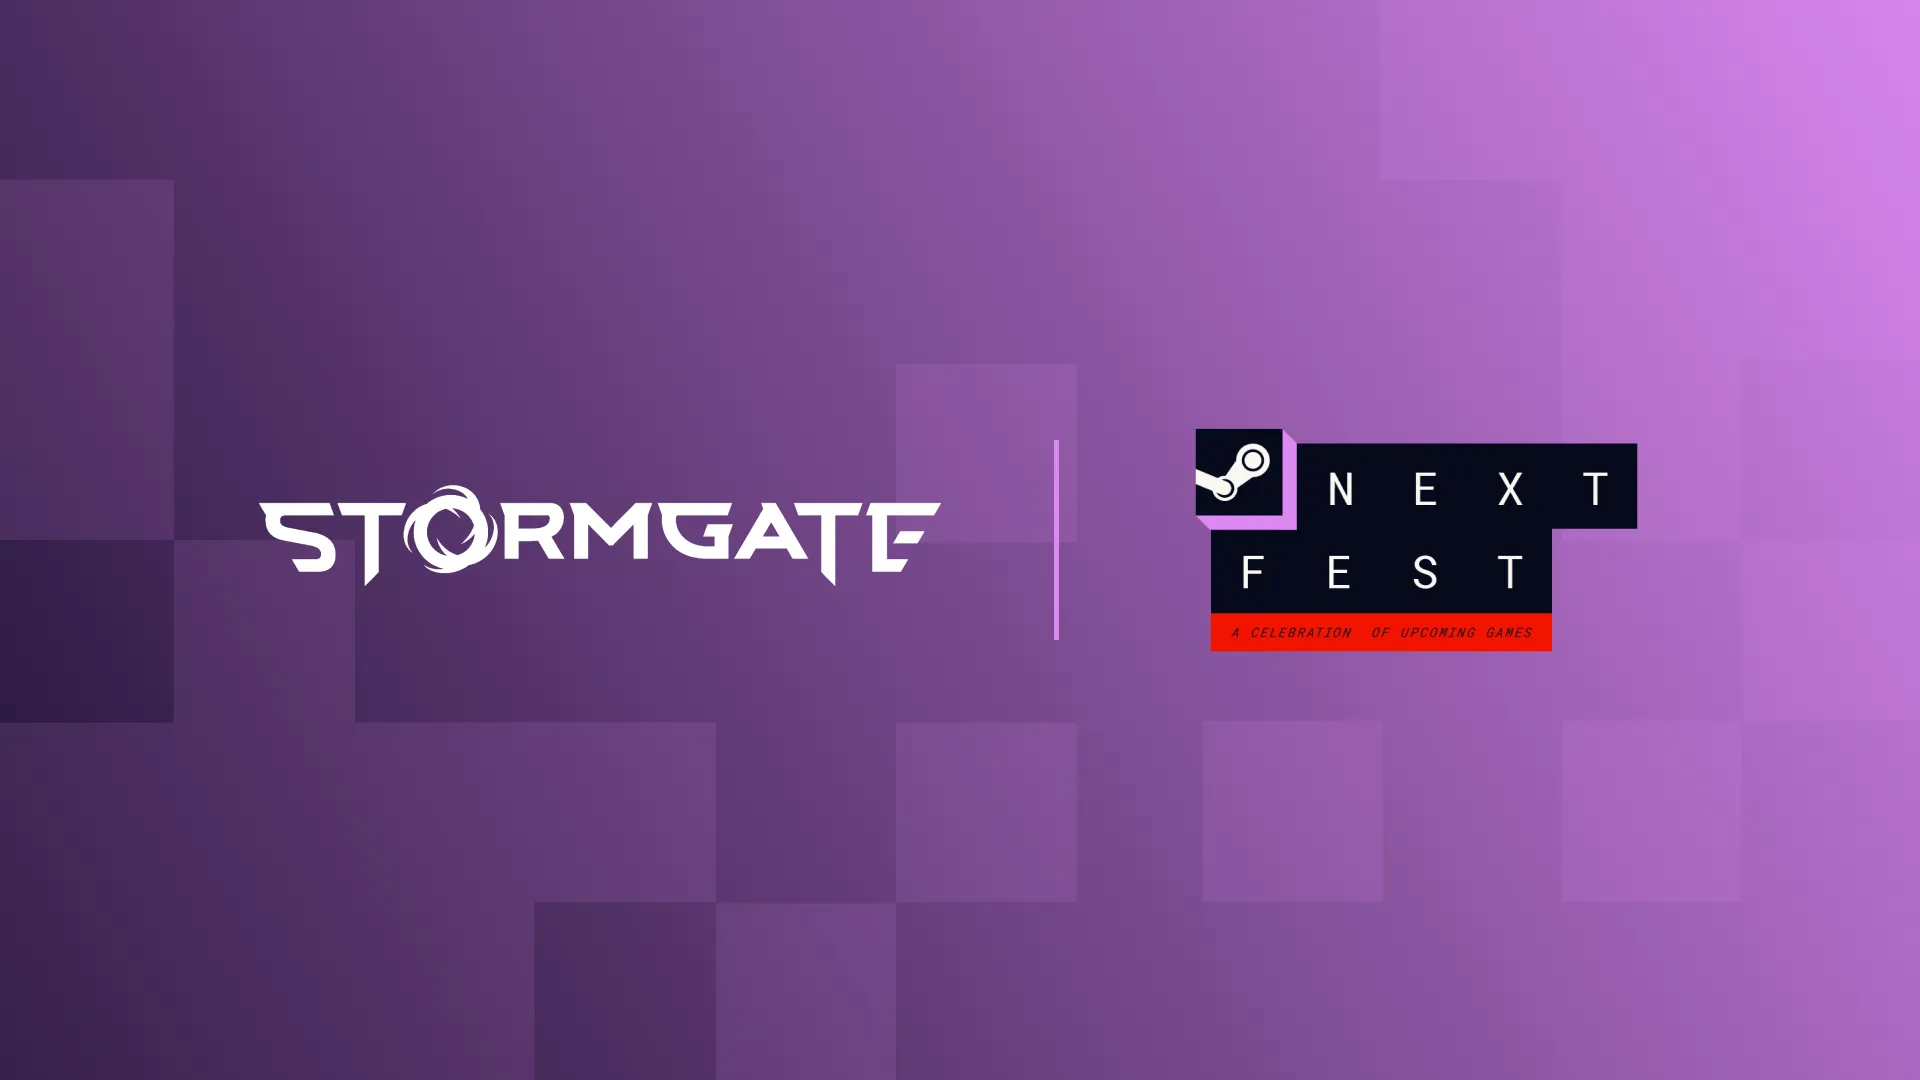 Stormgate Coming to Steam Next Fest Feb 5 - 12